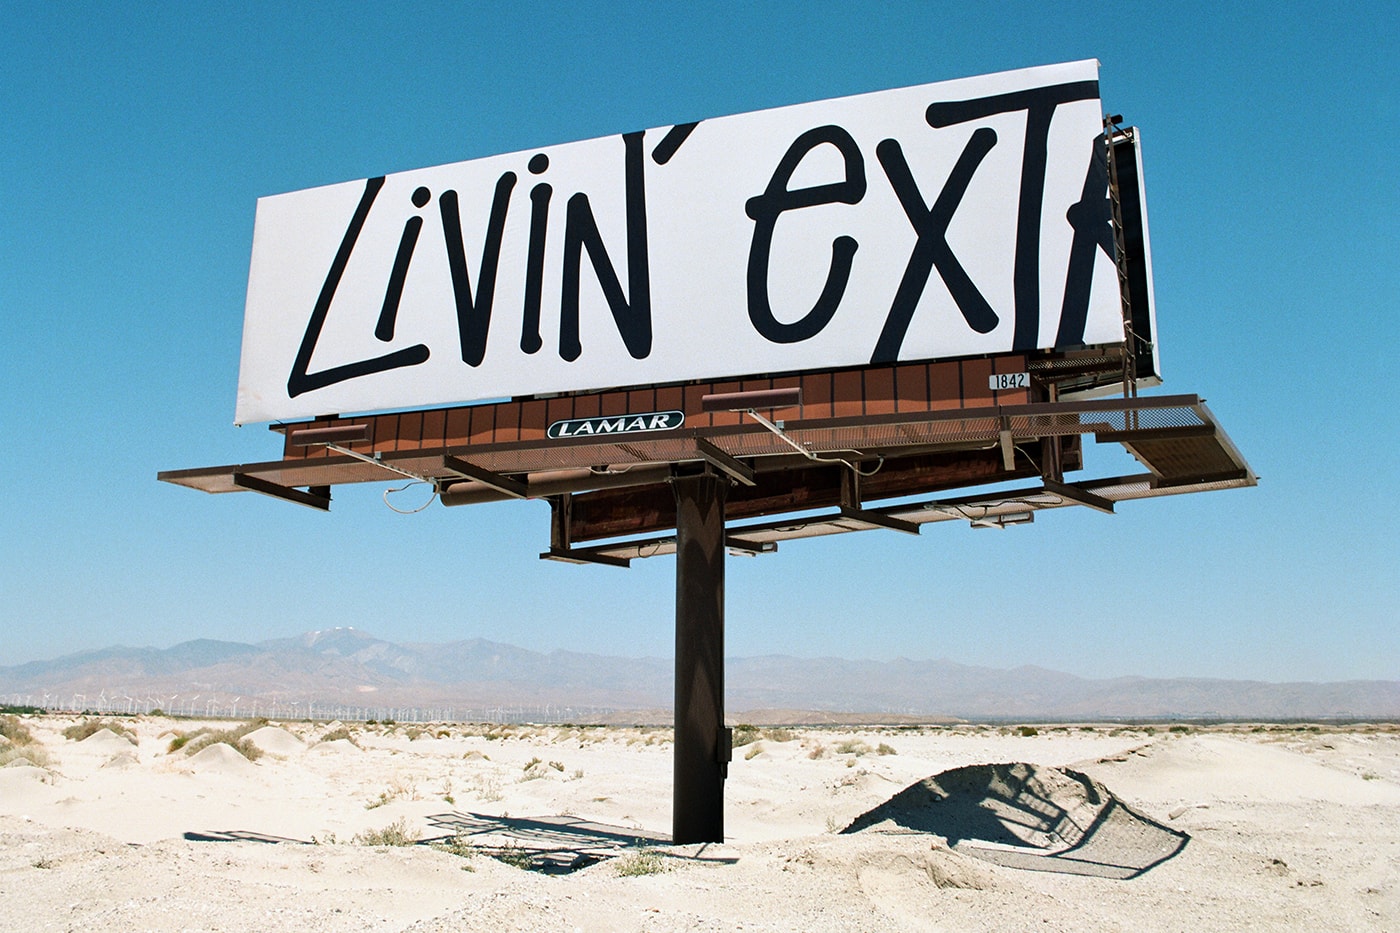 Stussy LIVIN EXTRA LARGE T shirt billboards california desert white black tee motto broadcast blue skies highway campaign project initiative